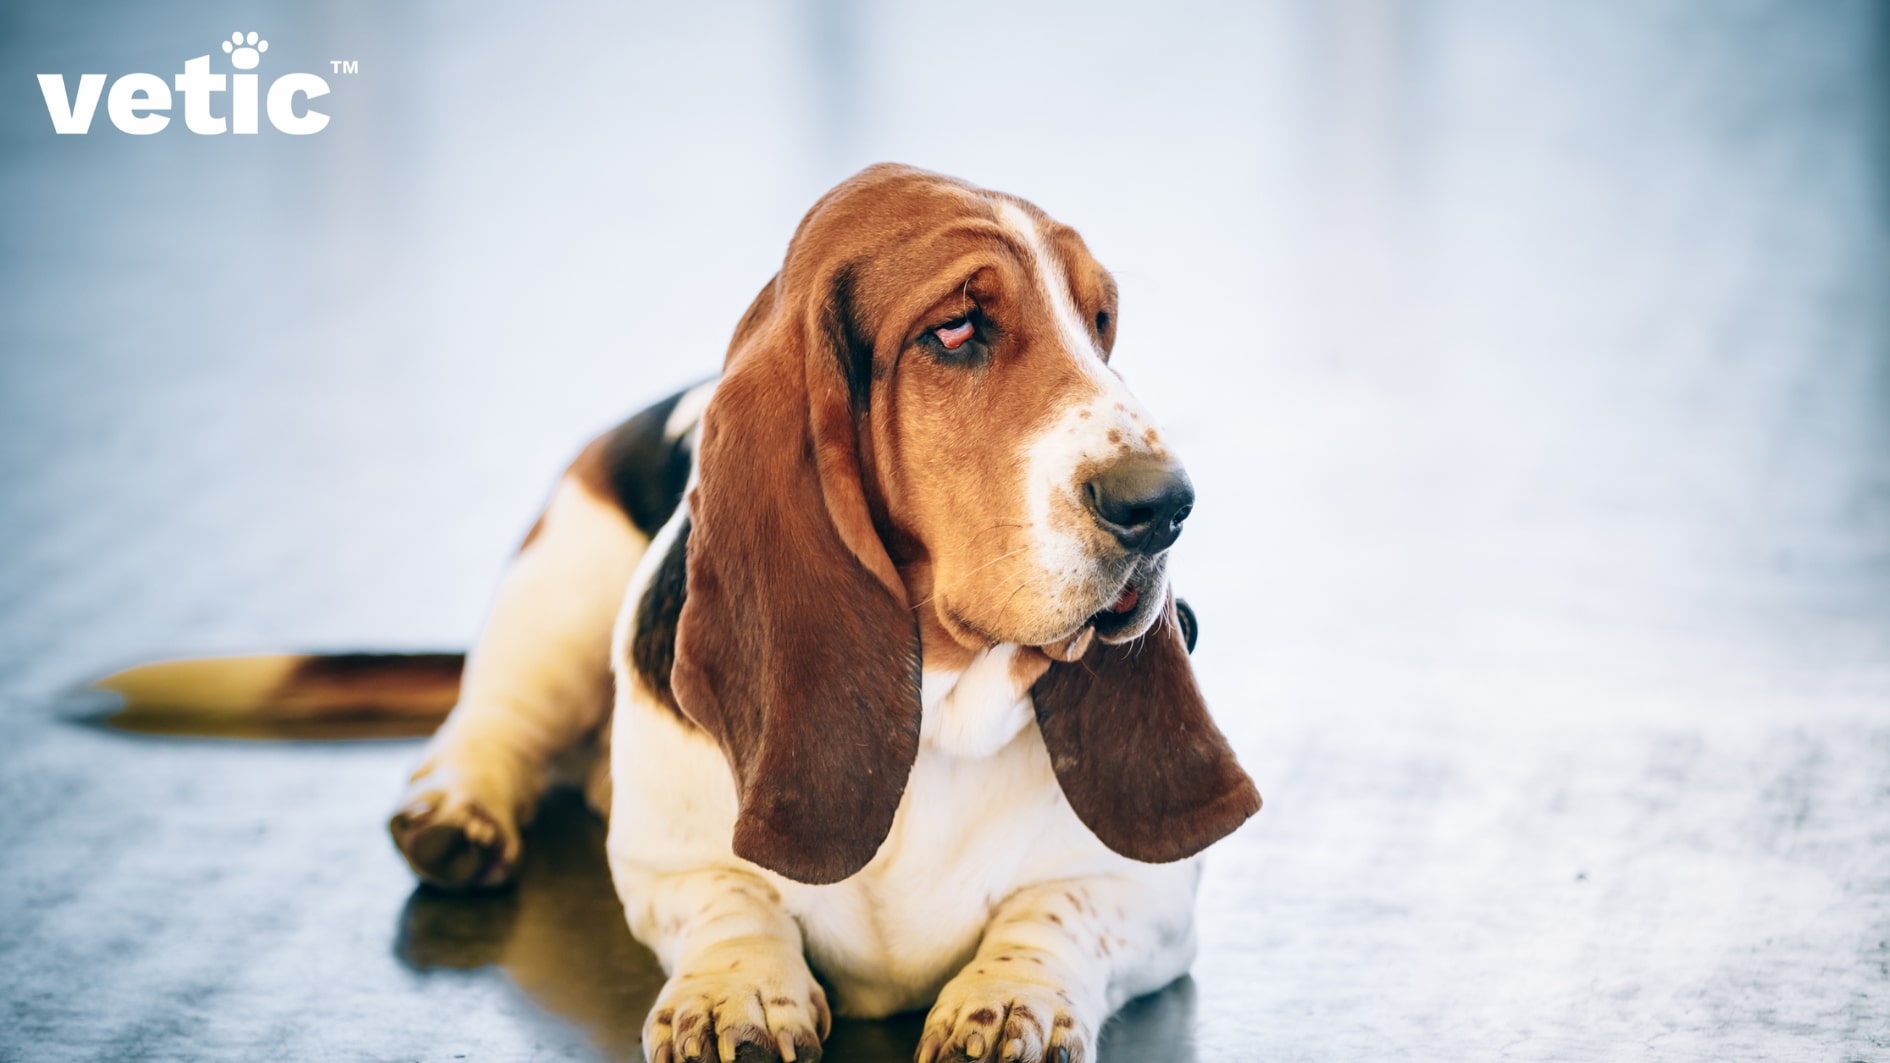 A Basset Hound sitting on a hardwood floor looking to the right of the camera. It is one breed particularly prone to bloat and gastric torsion due to the structure of their body.